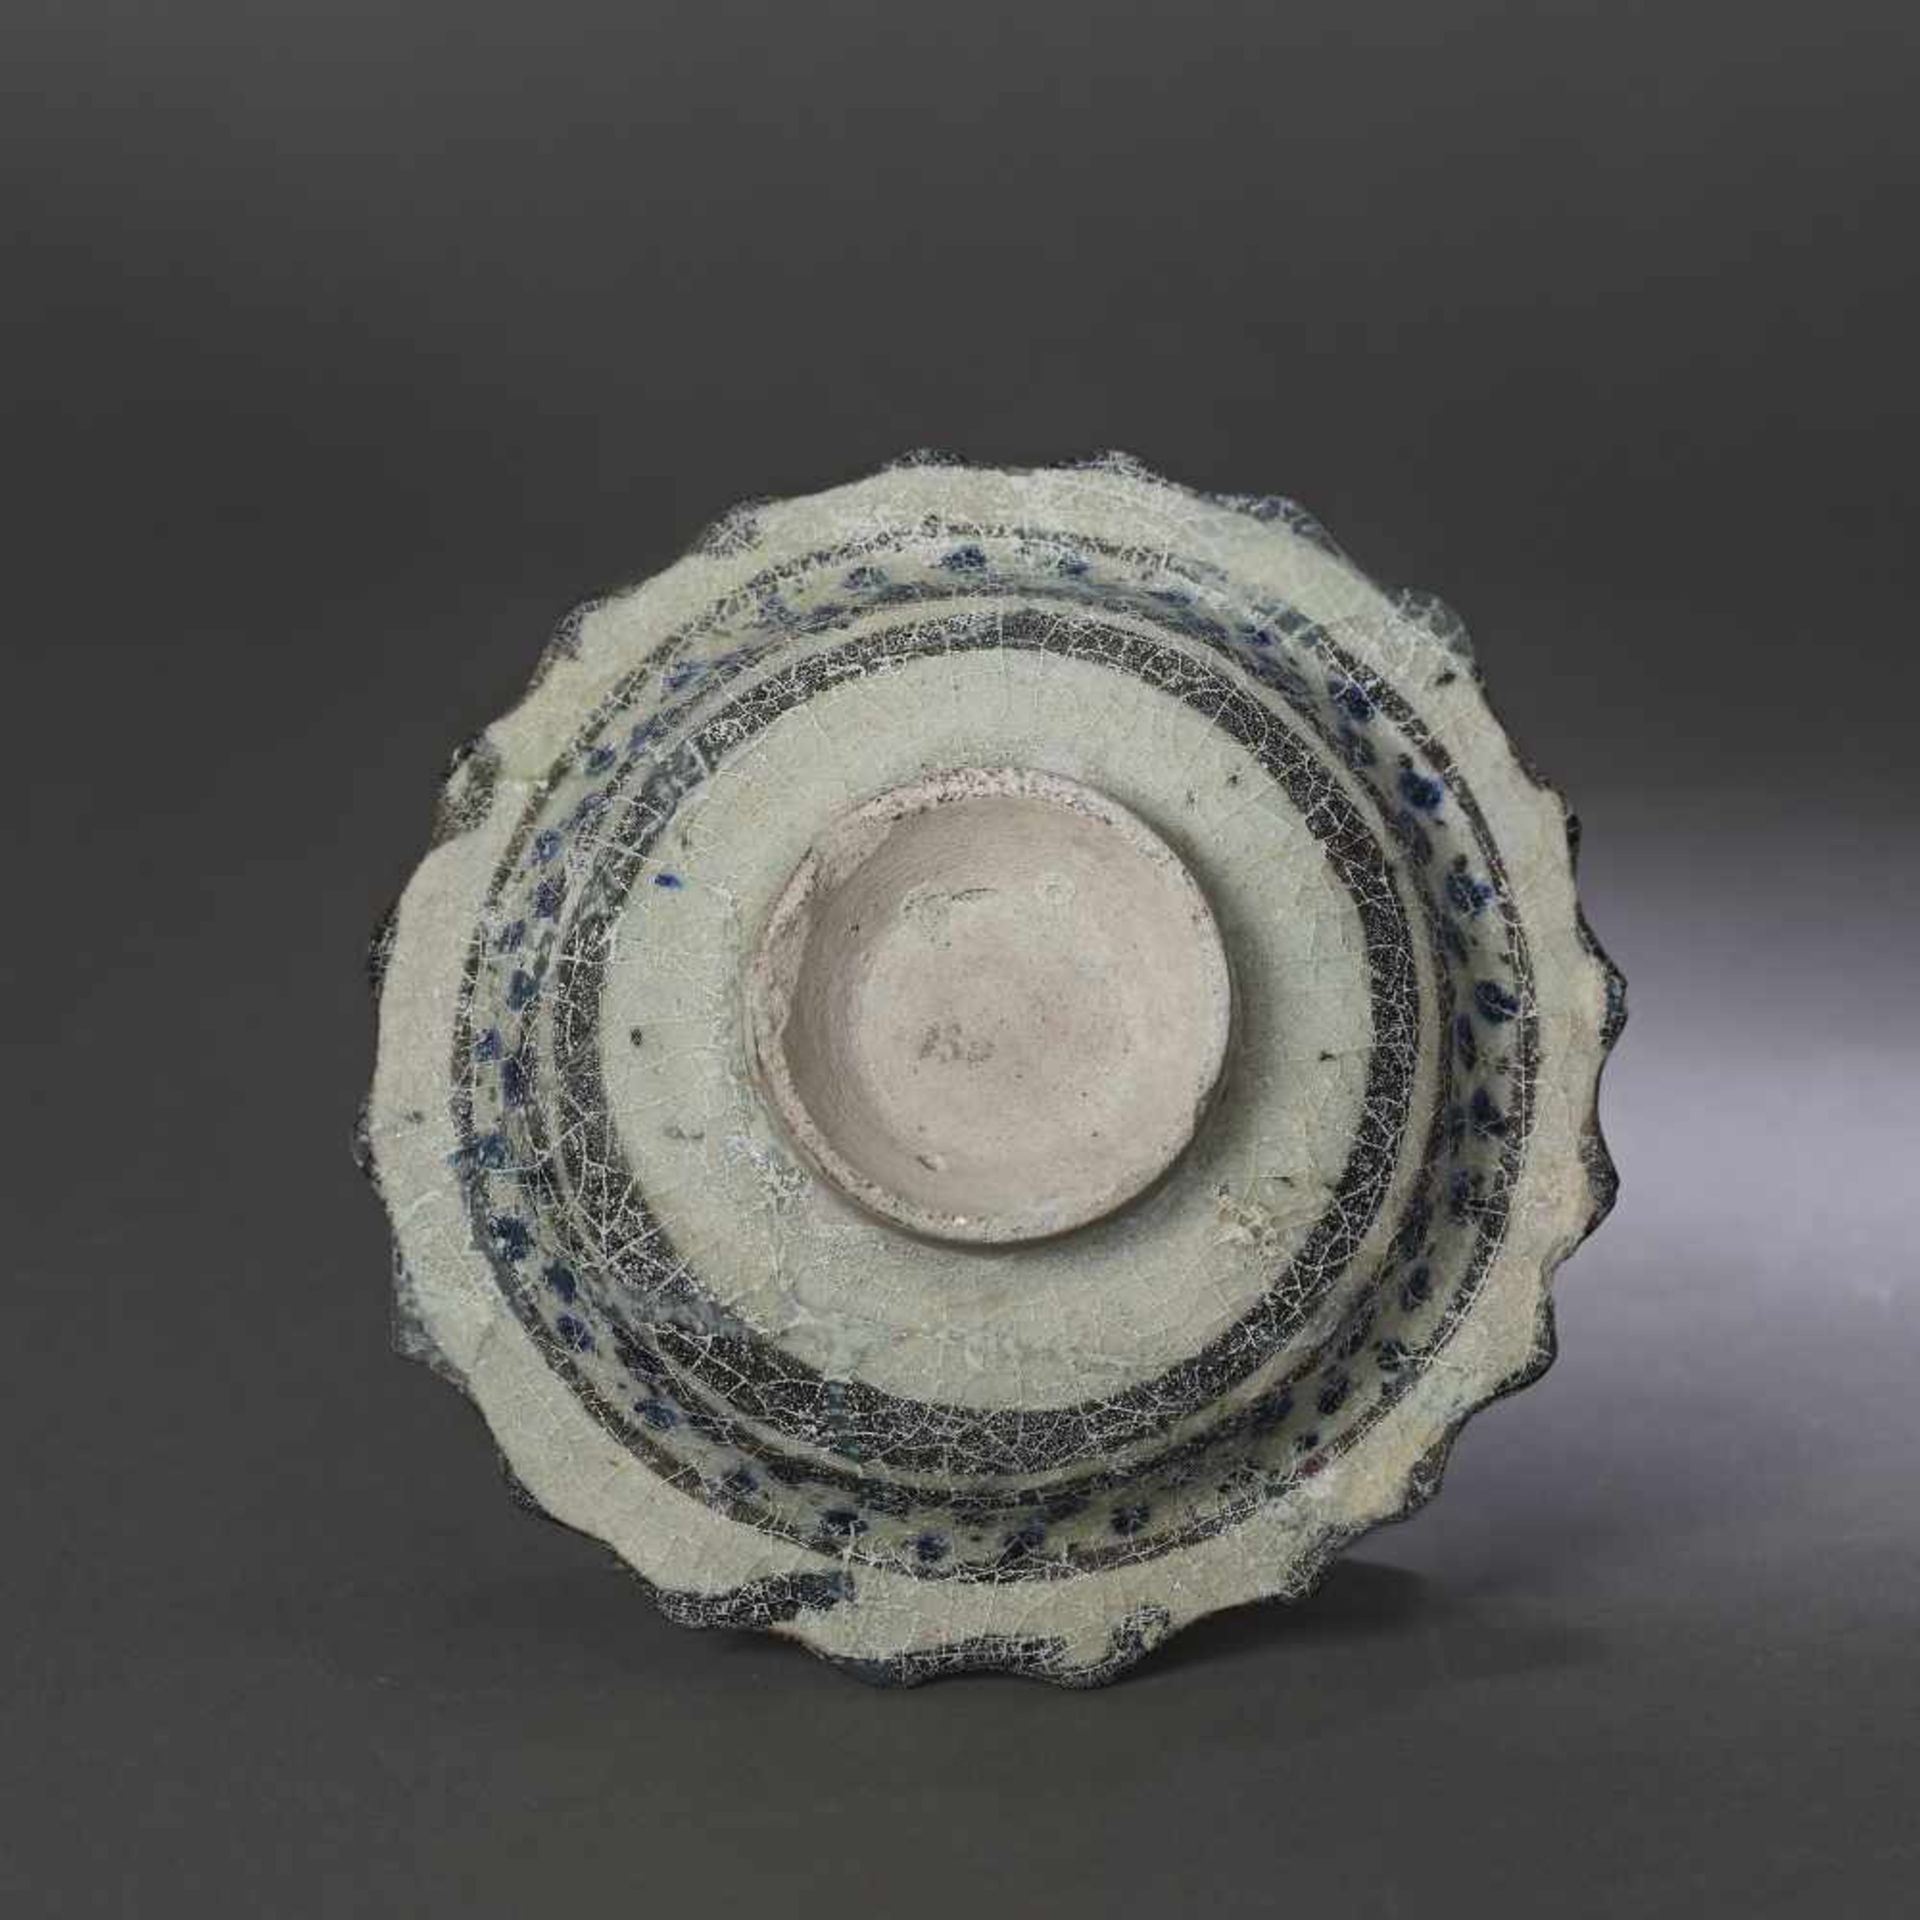 Glazed ceramic Persian bowl, decorated with hunting scene (a rabbit running), approx. 850 years old, - Image 4 of 5